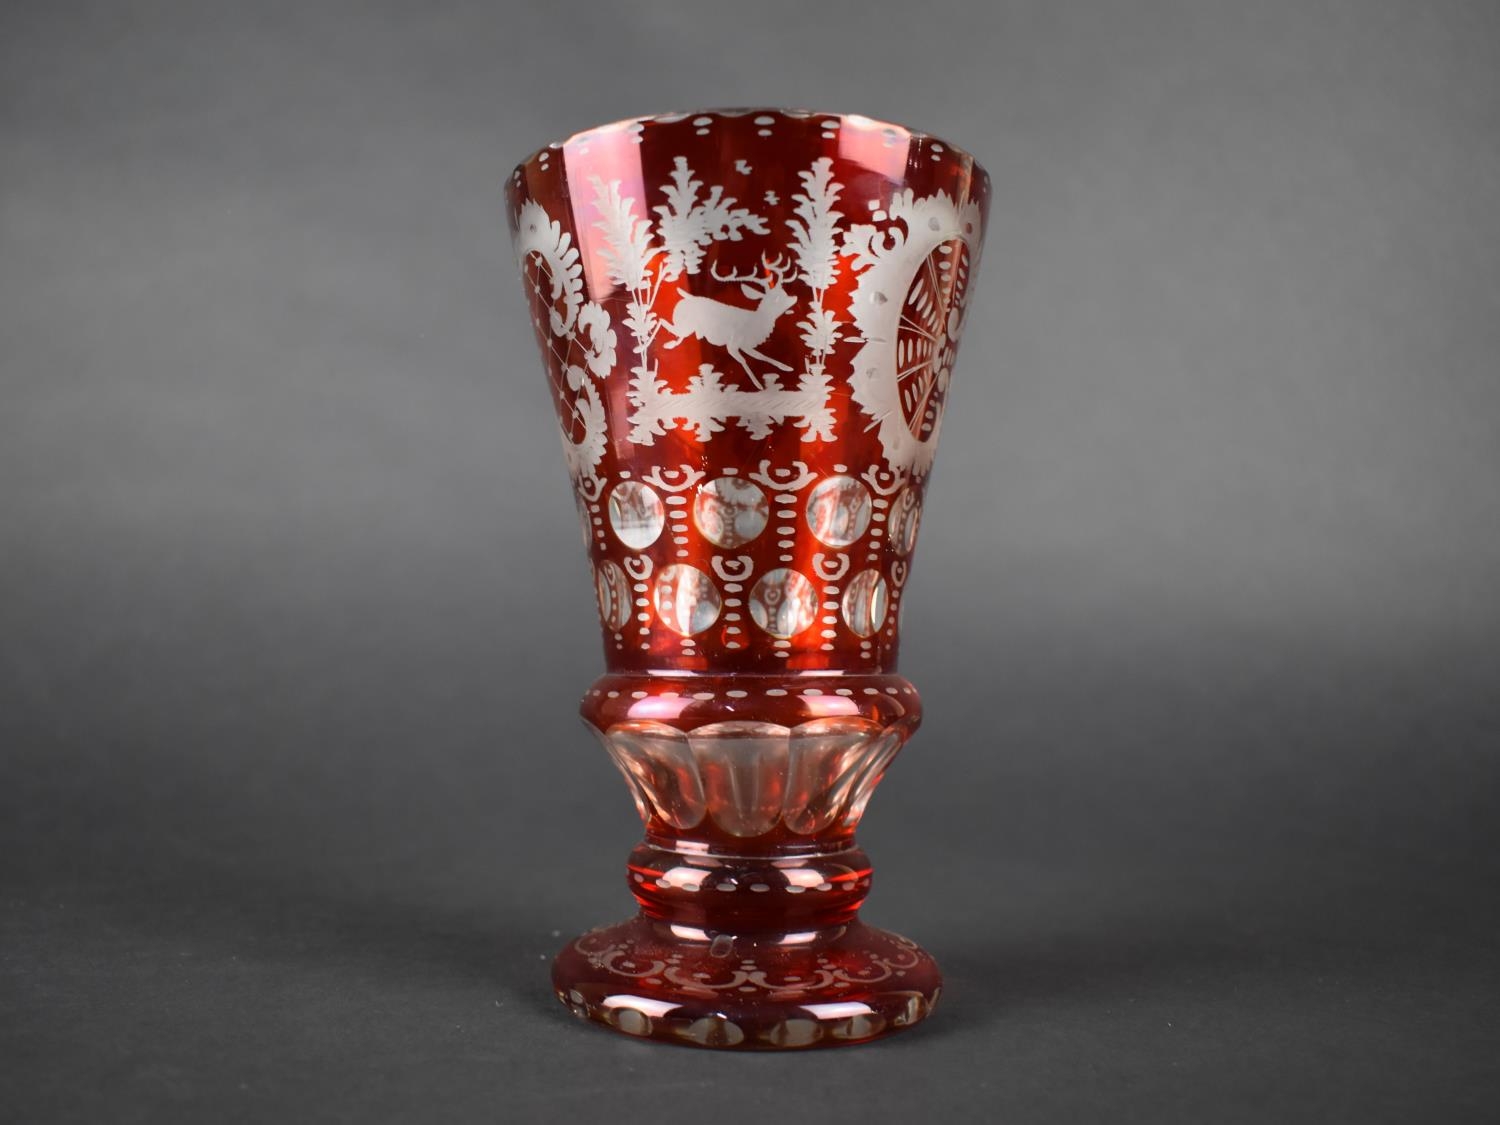 A Bohemian Etched Ruby Glass Vase Decorated with Foliage, Scrolls, Deer, Stalk, Castle, 16cm high - Image 3 of 5